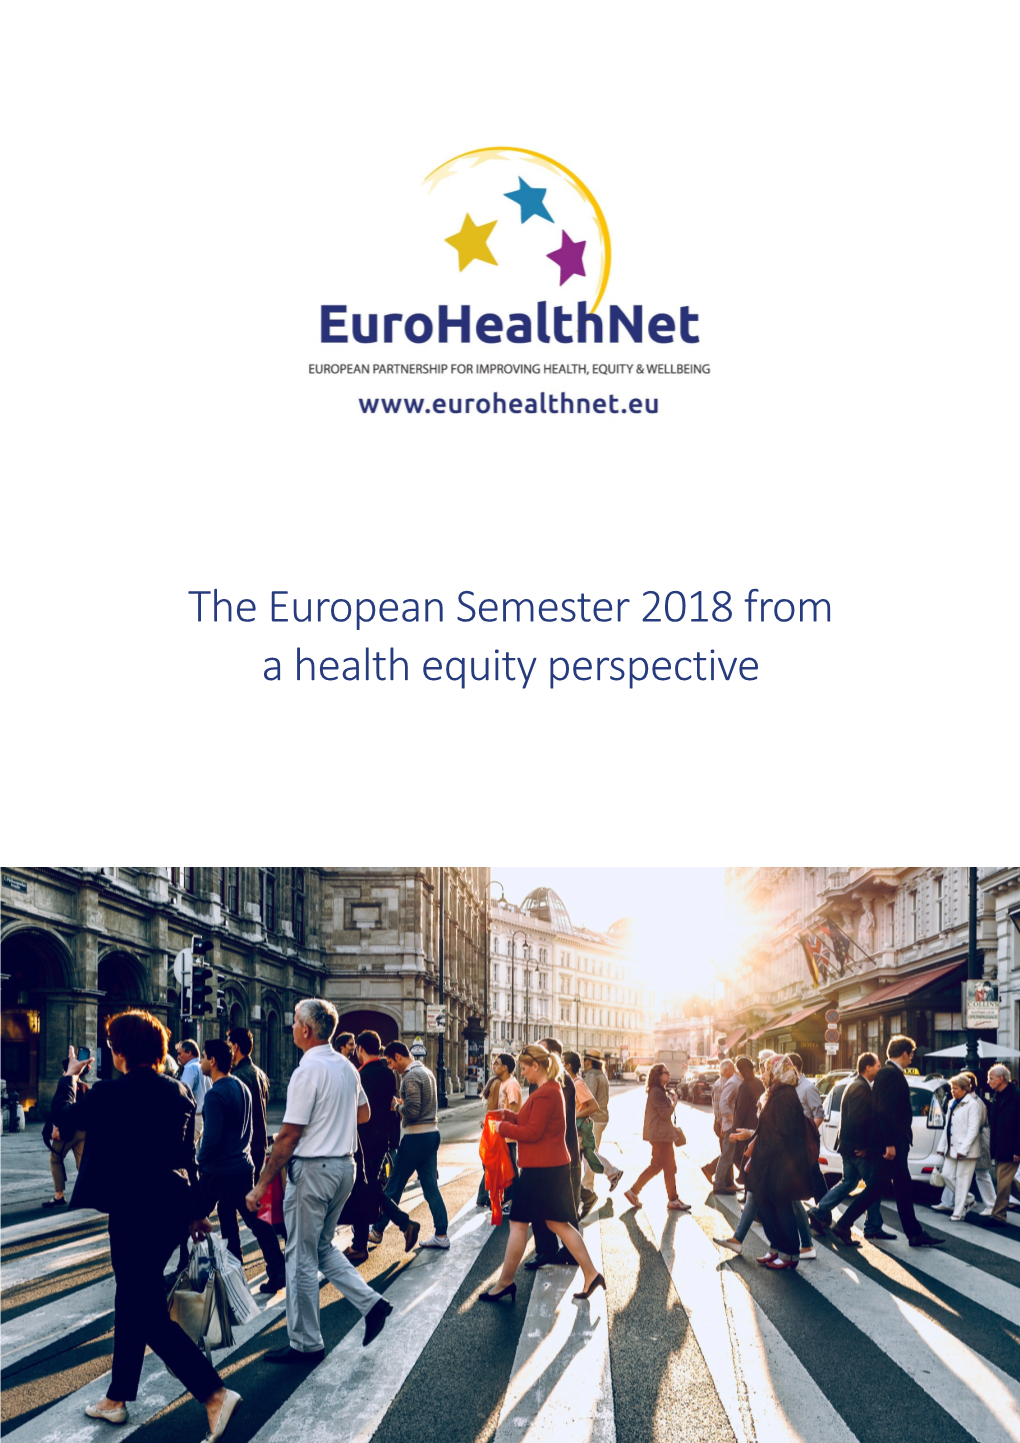 The European Semester 2018 from a Health Equity Perspective